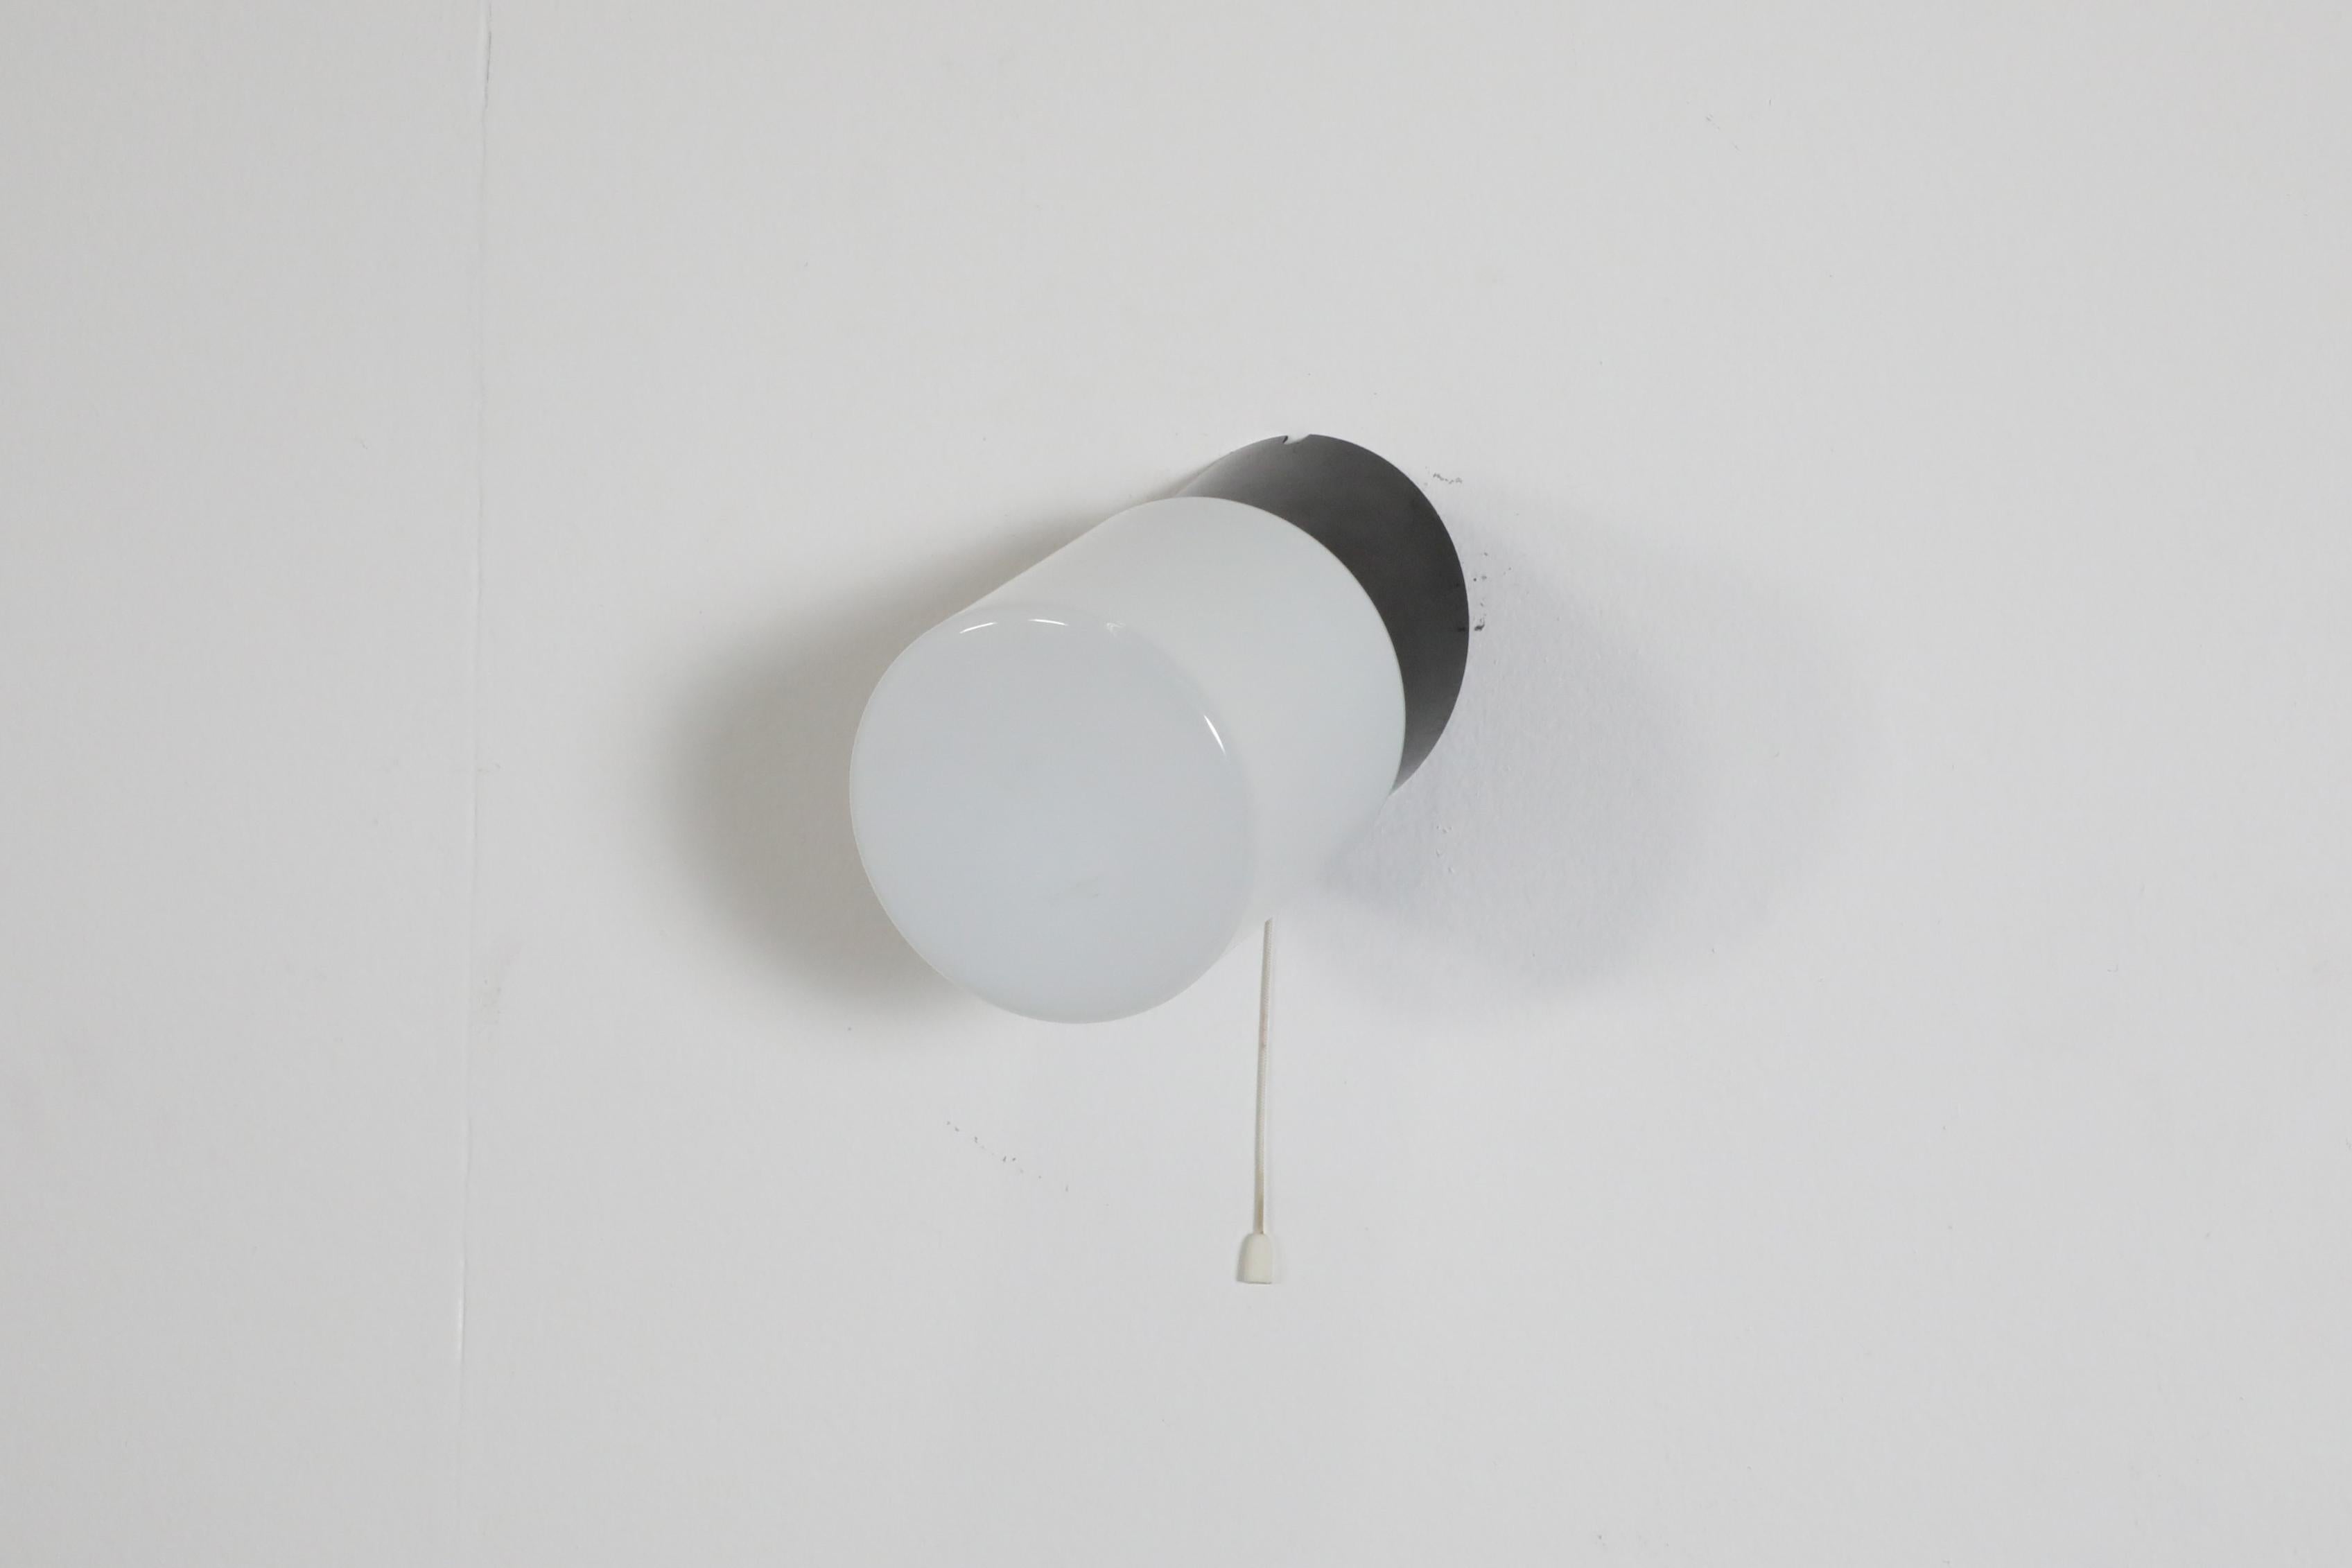 Cylinder Milk Glass Sconce with Black Bakelite Base and Pull String Switch For Sale 4